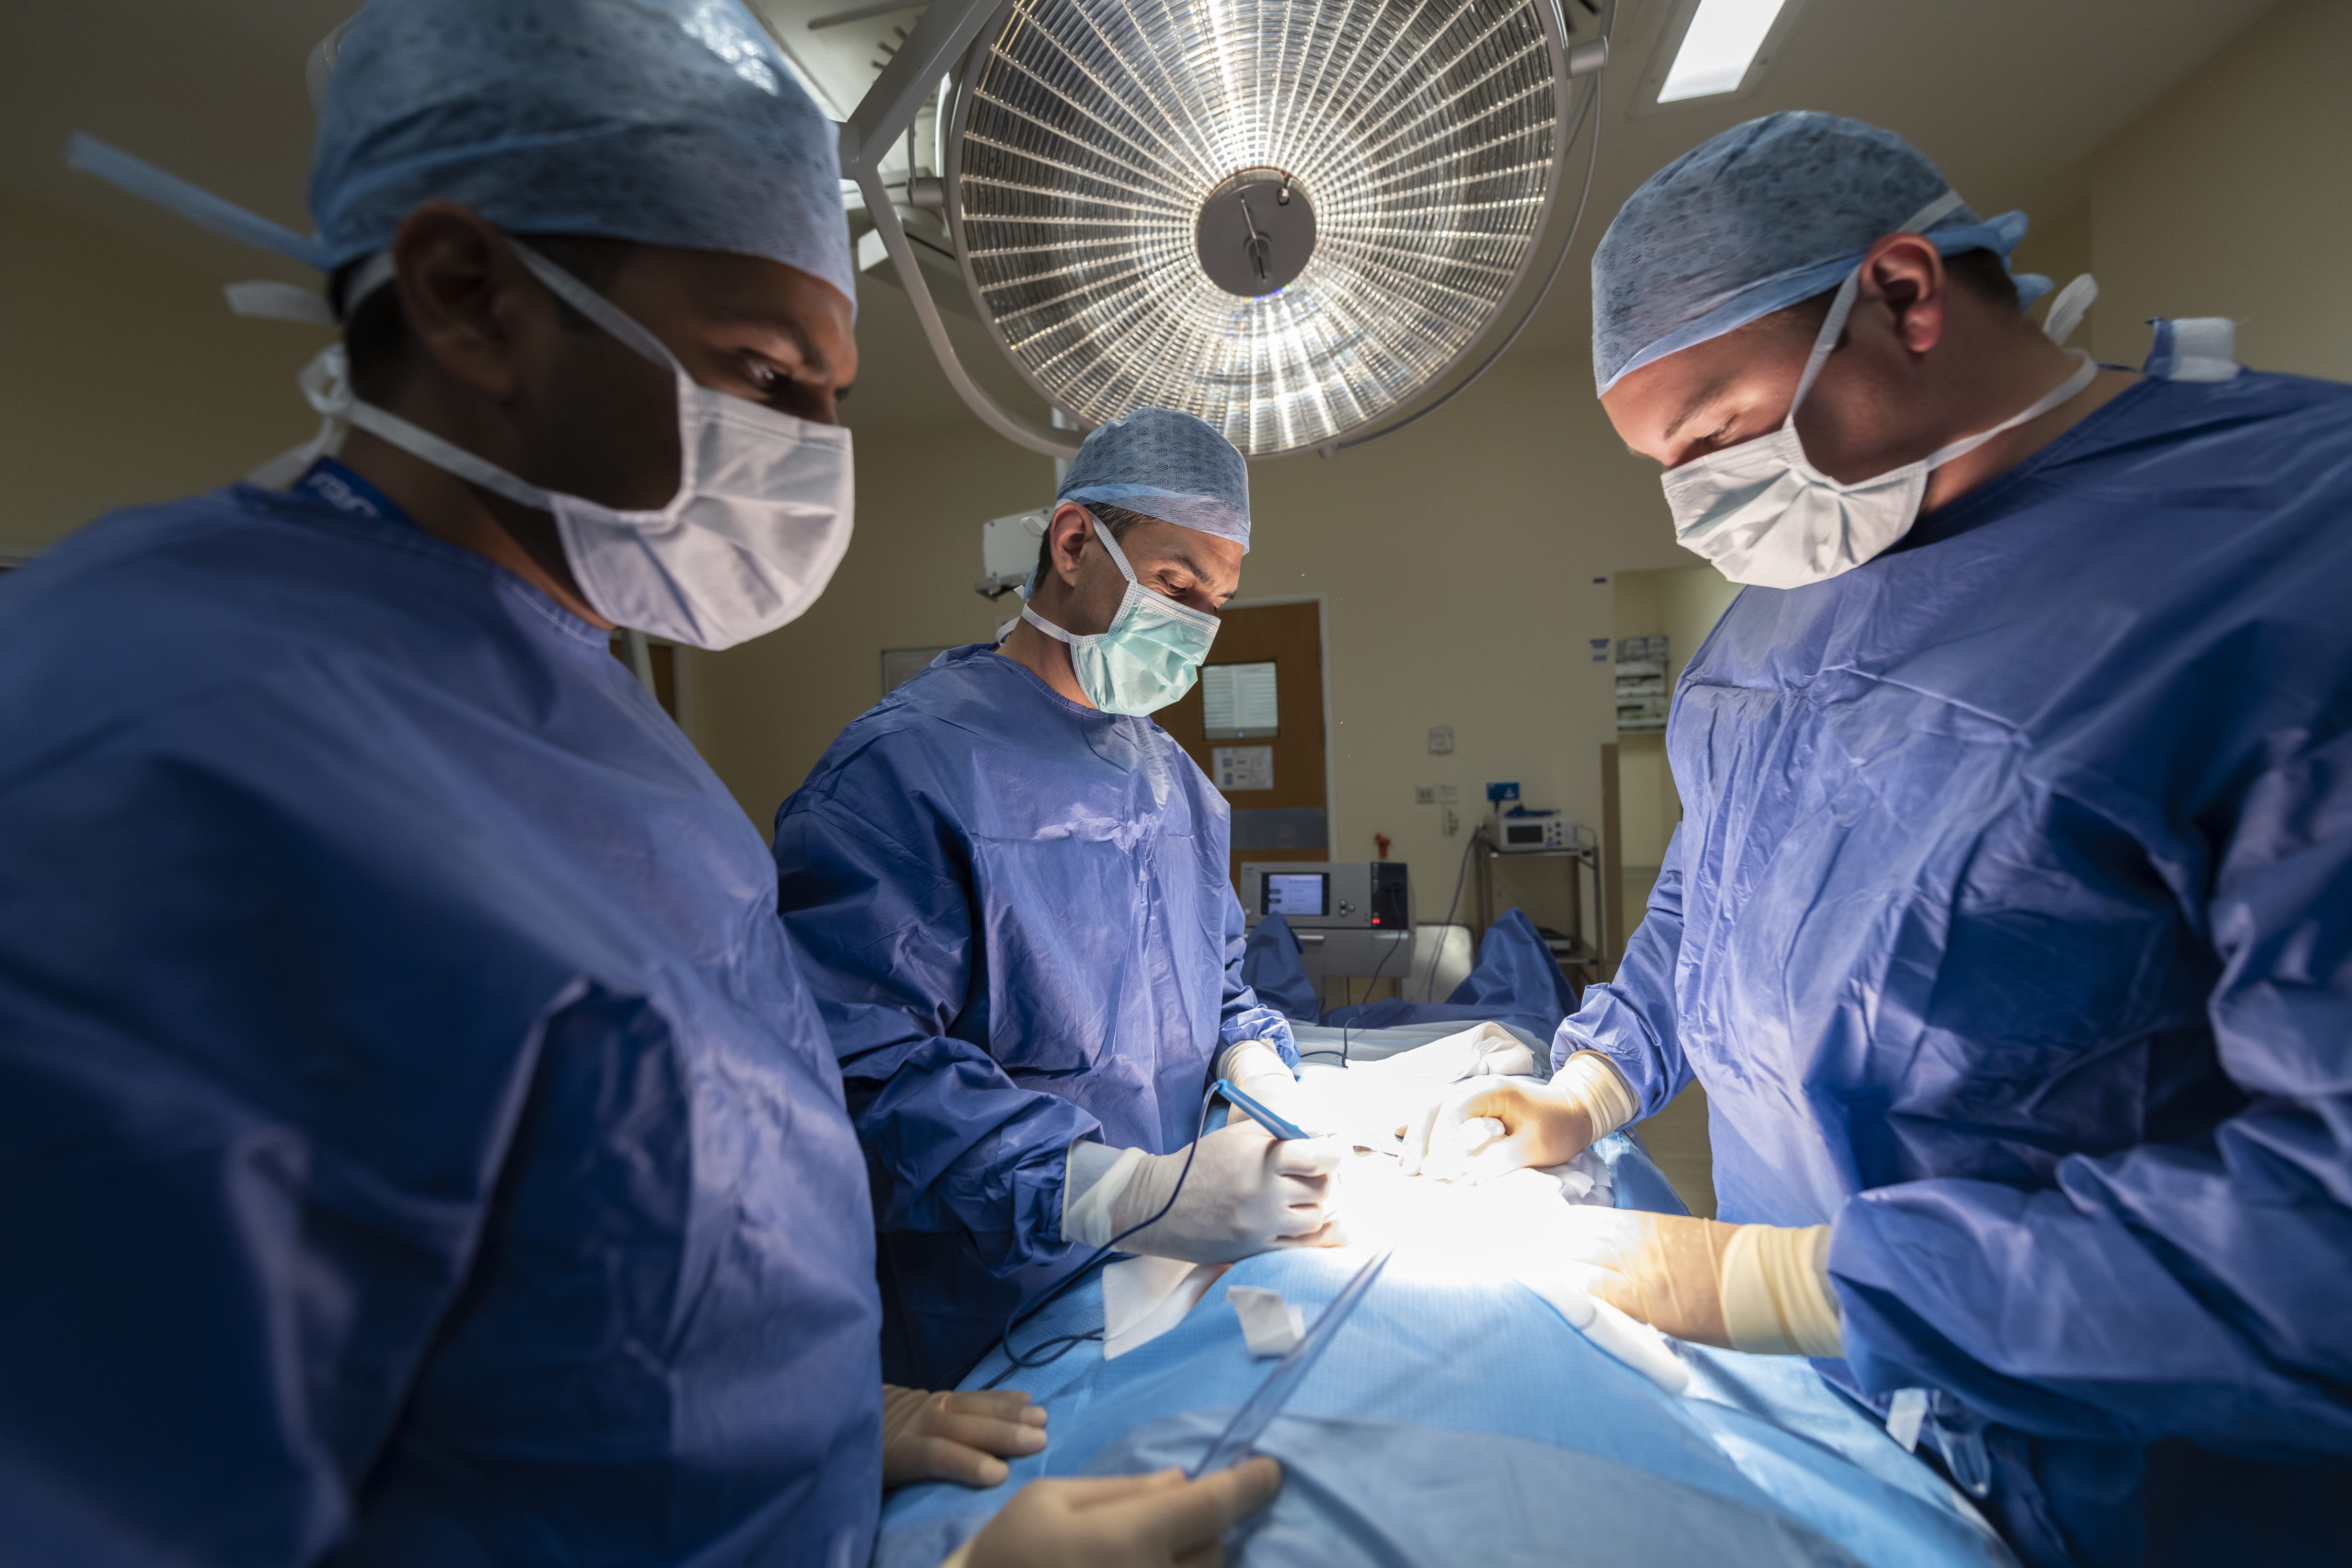 New surgical devices improve access to surgery in low-resource settings